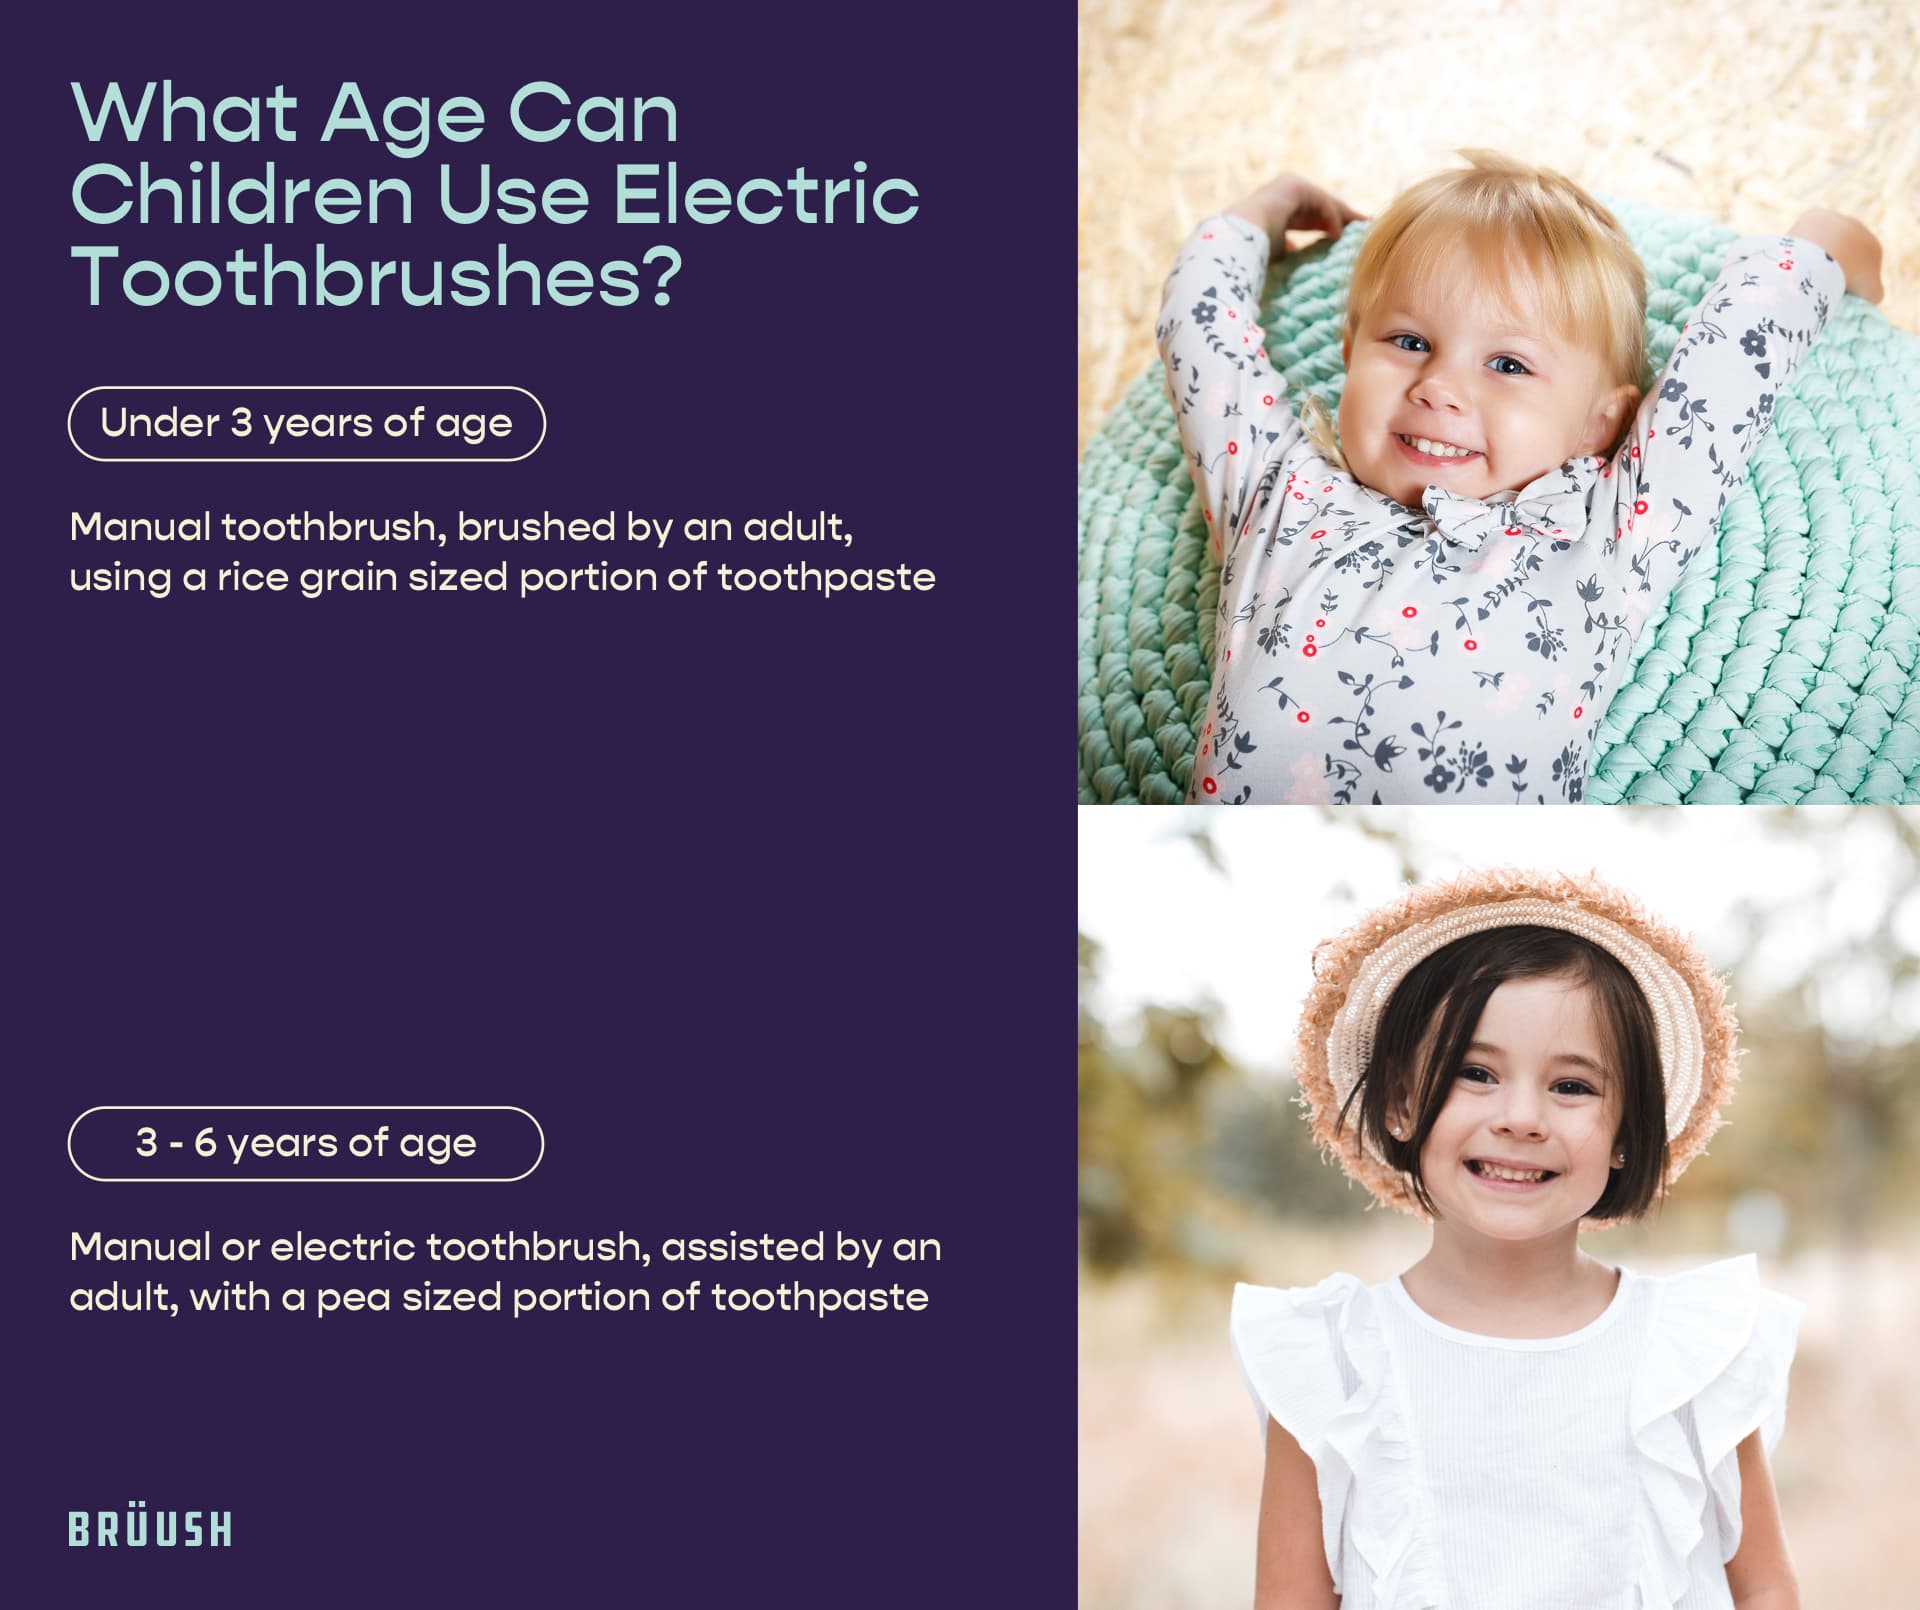 what age can children use electric toothbrushes?